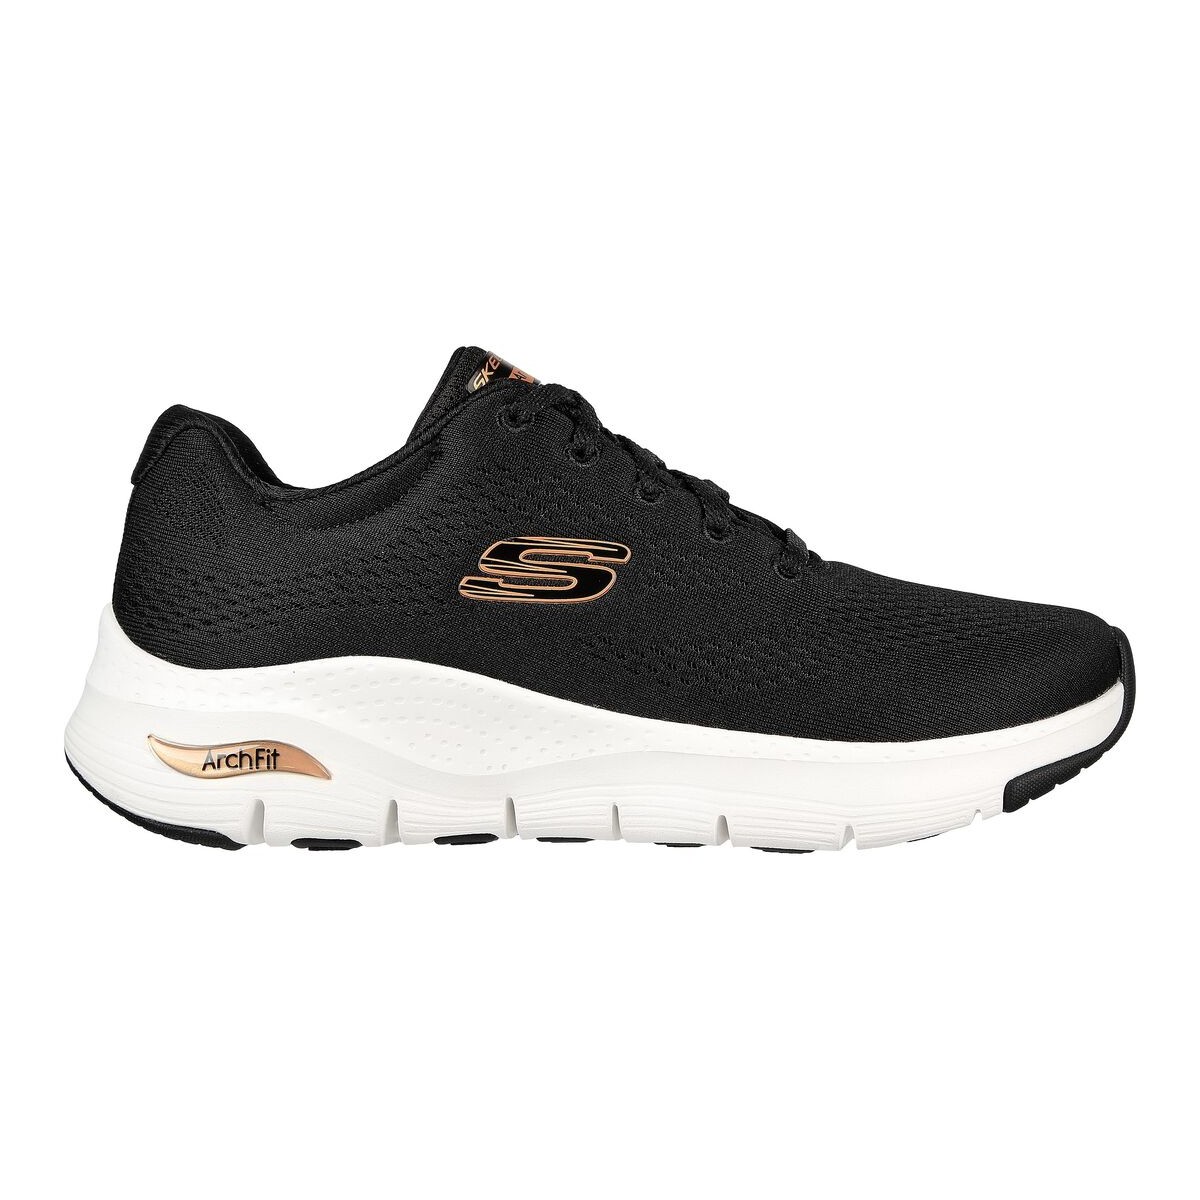 Skechers deportiva mujer negra Arch Fit Sk149057